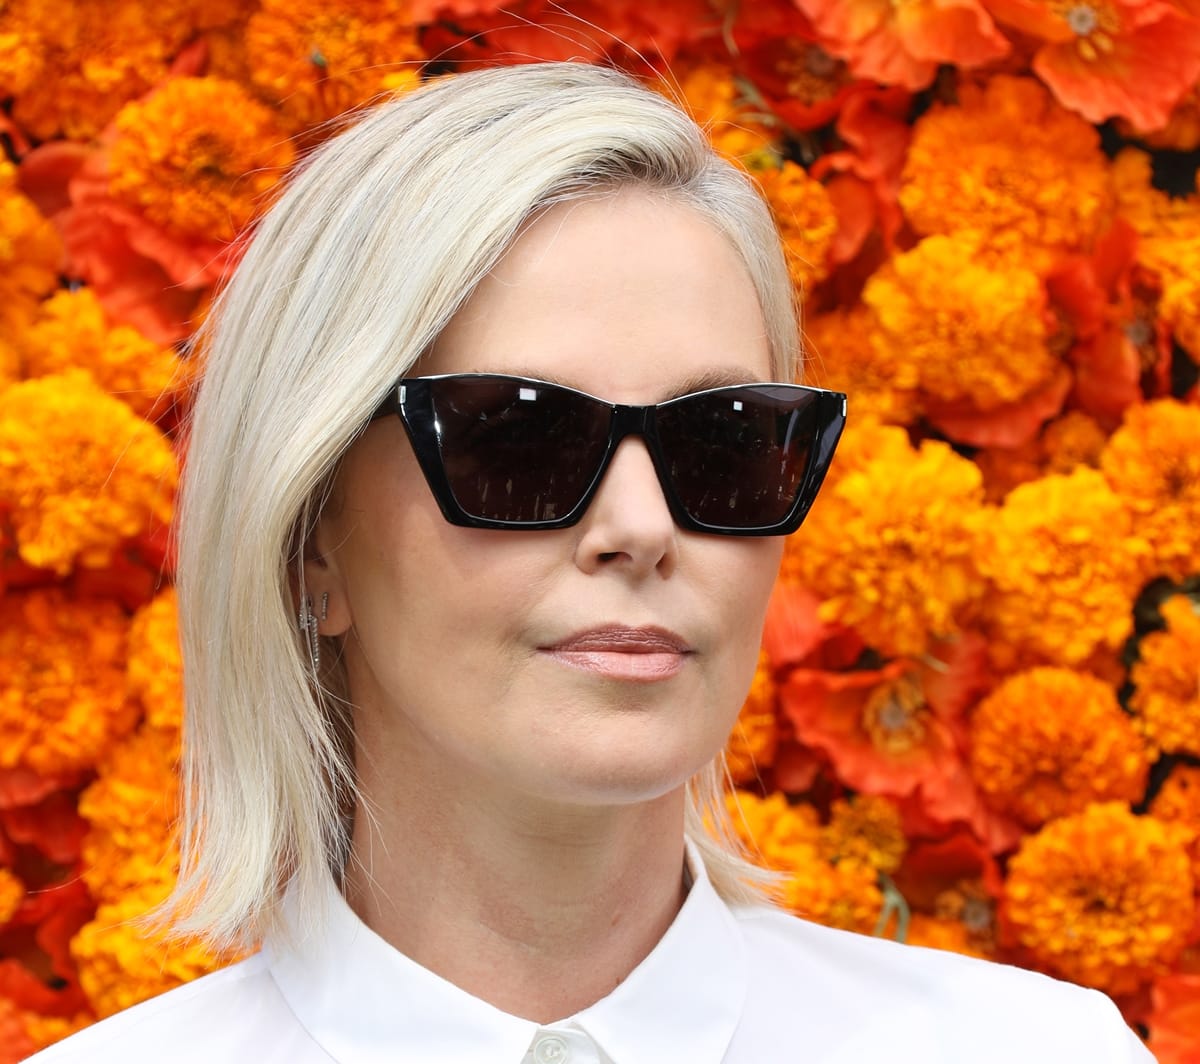 Charlize Theron is happy being single and doesn't feel the need to date anyone